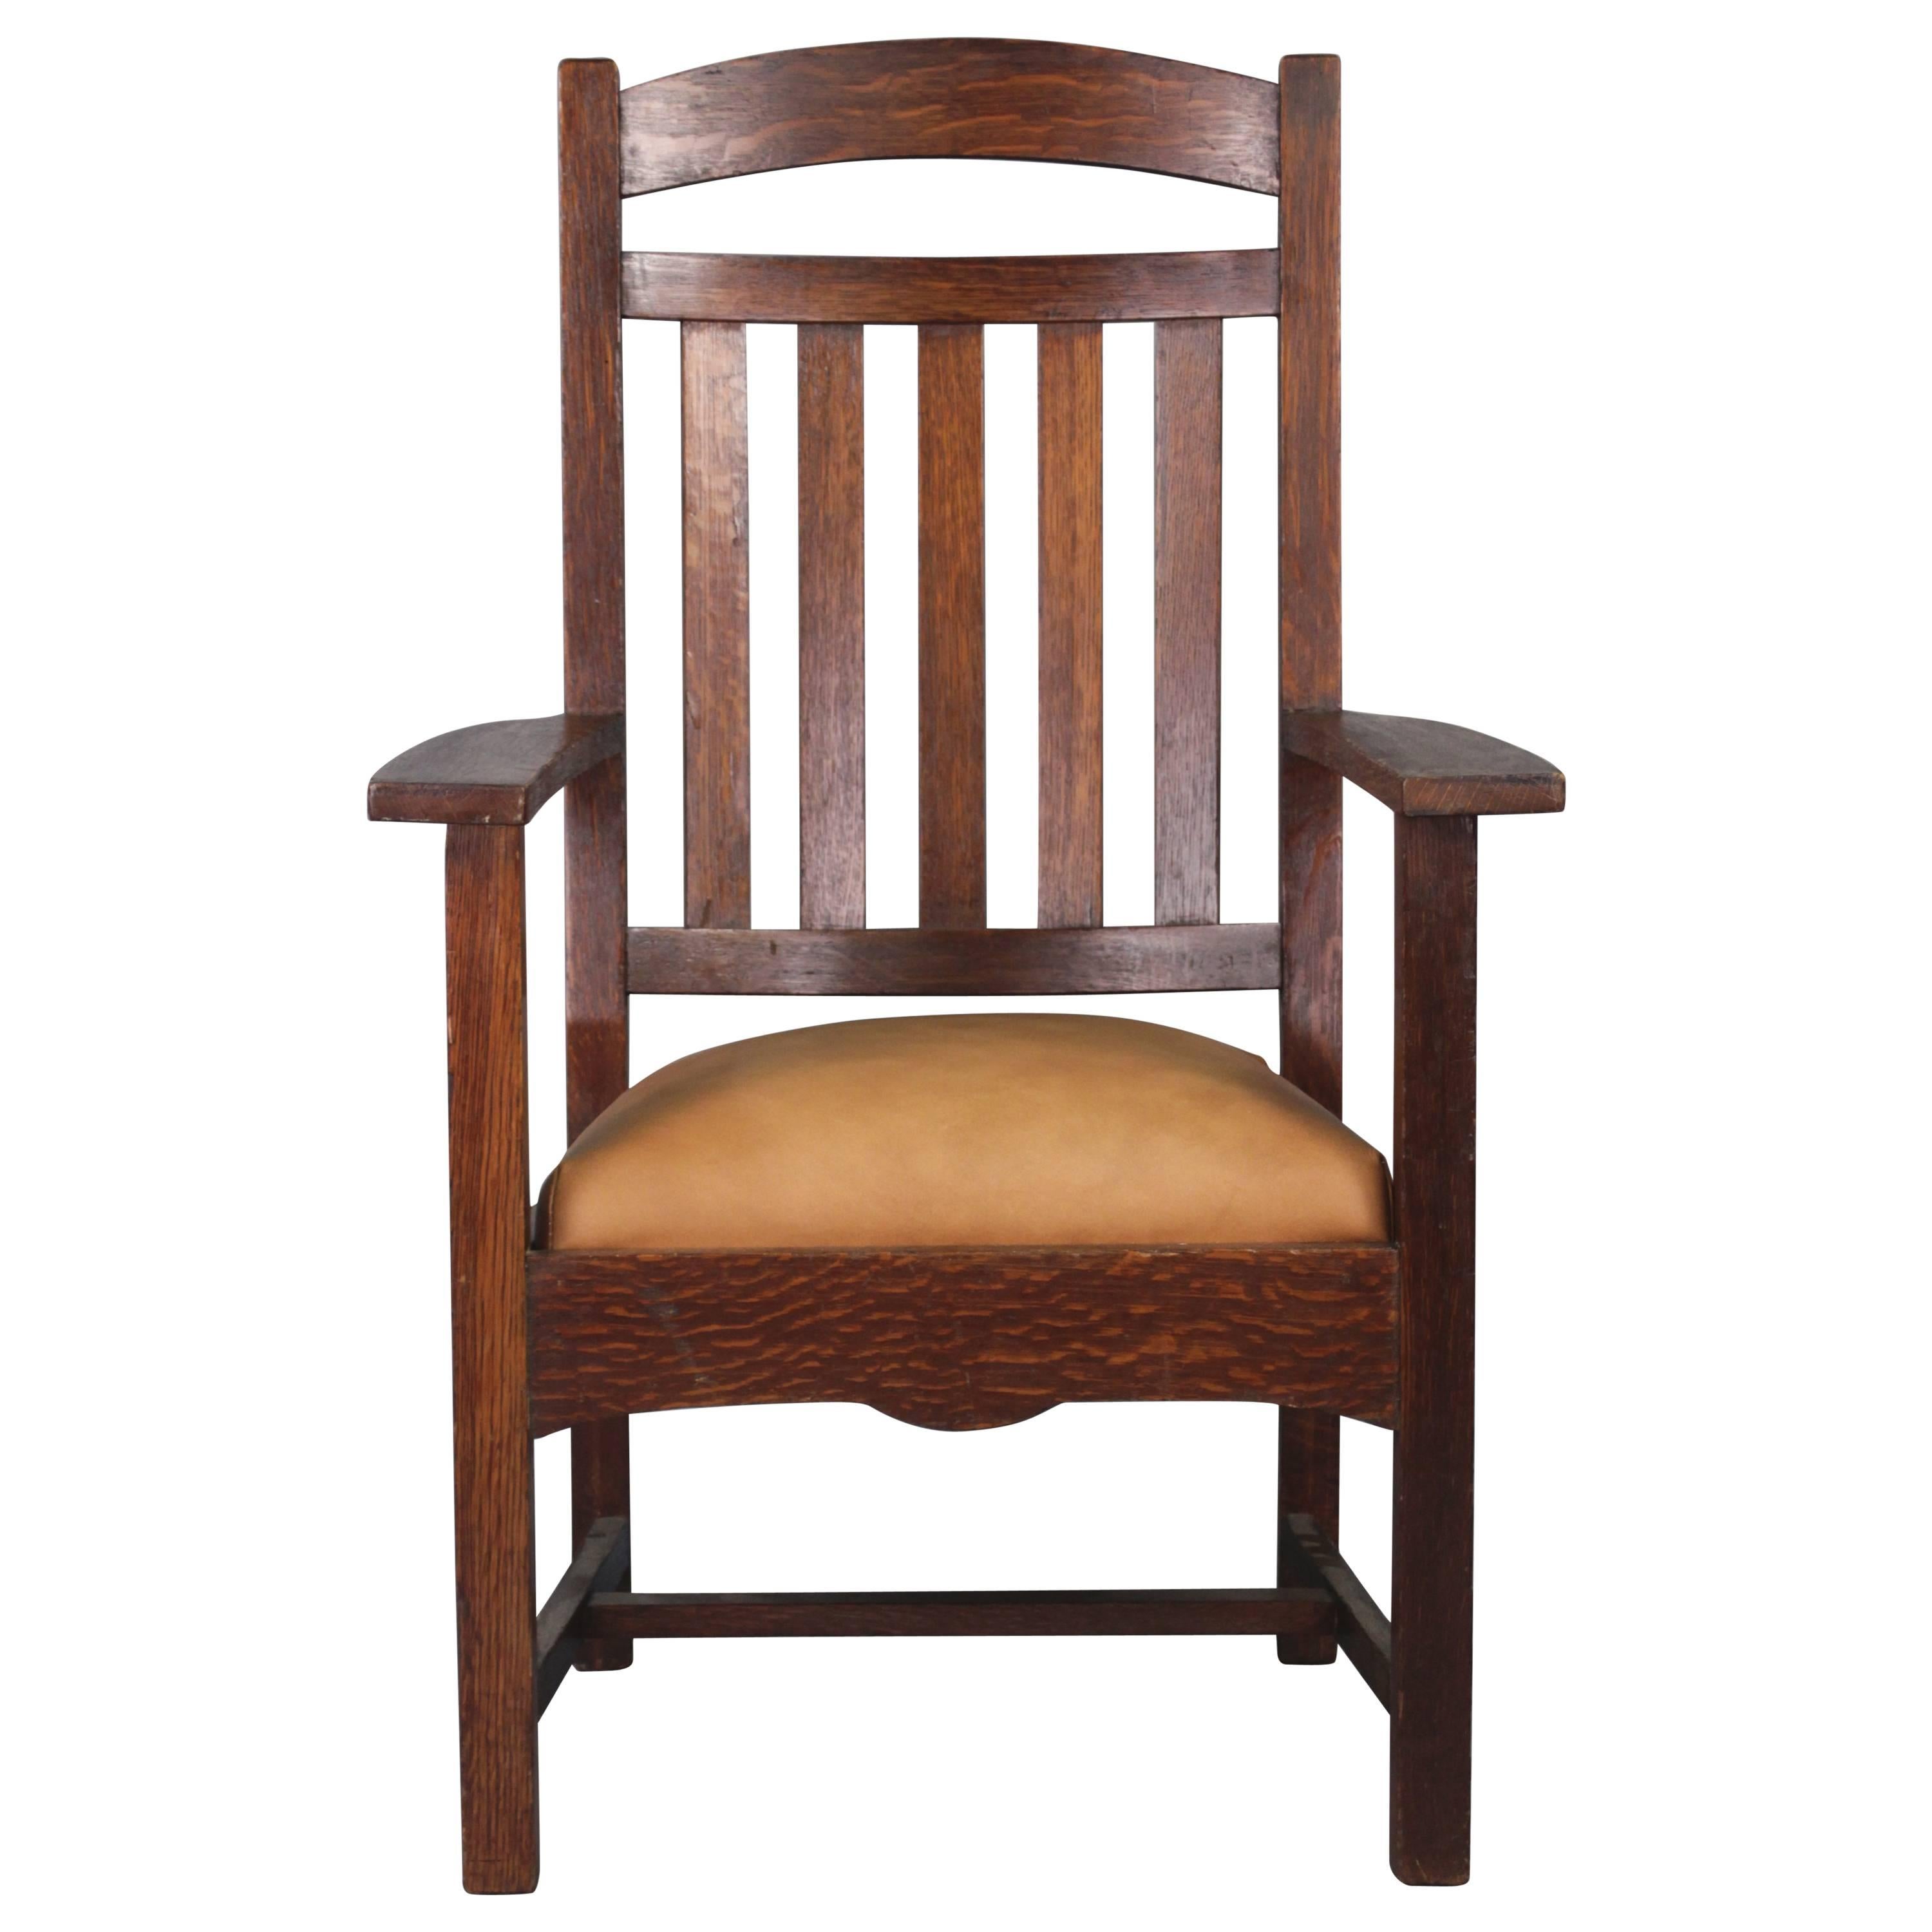 1910 Arts & Crafts Period Tall Back Armchair